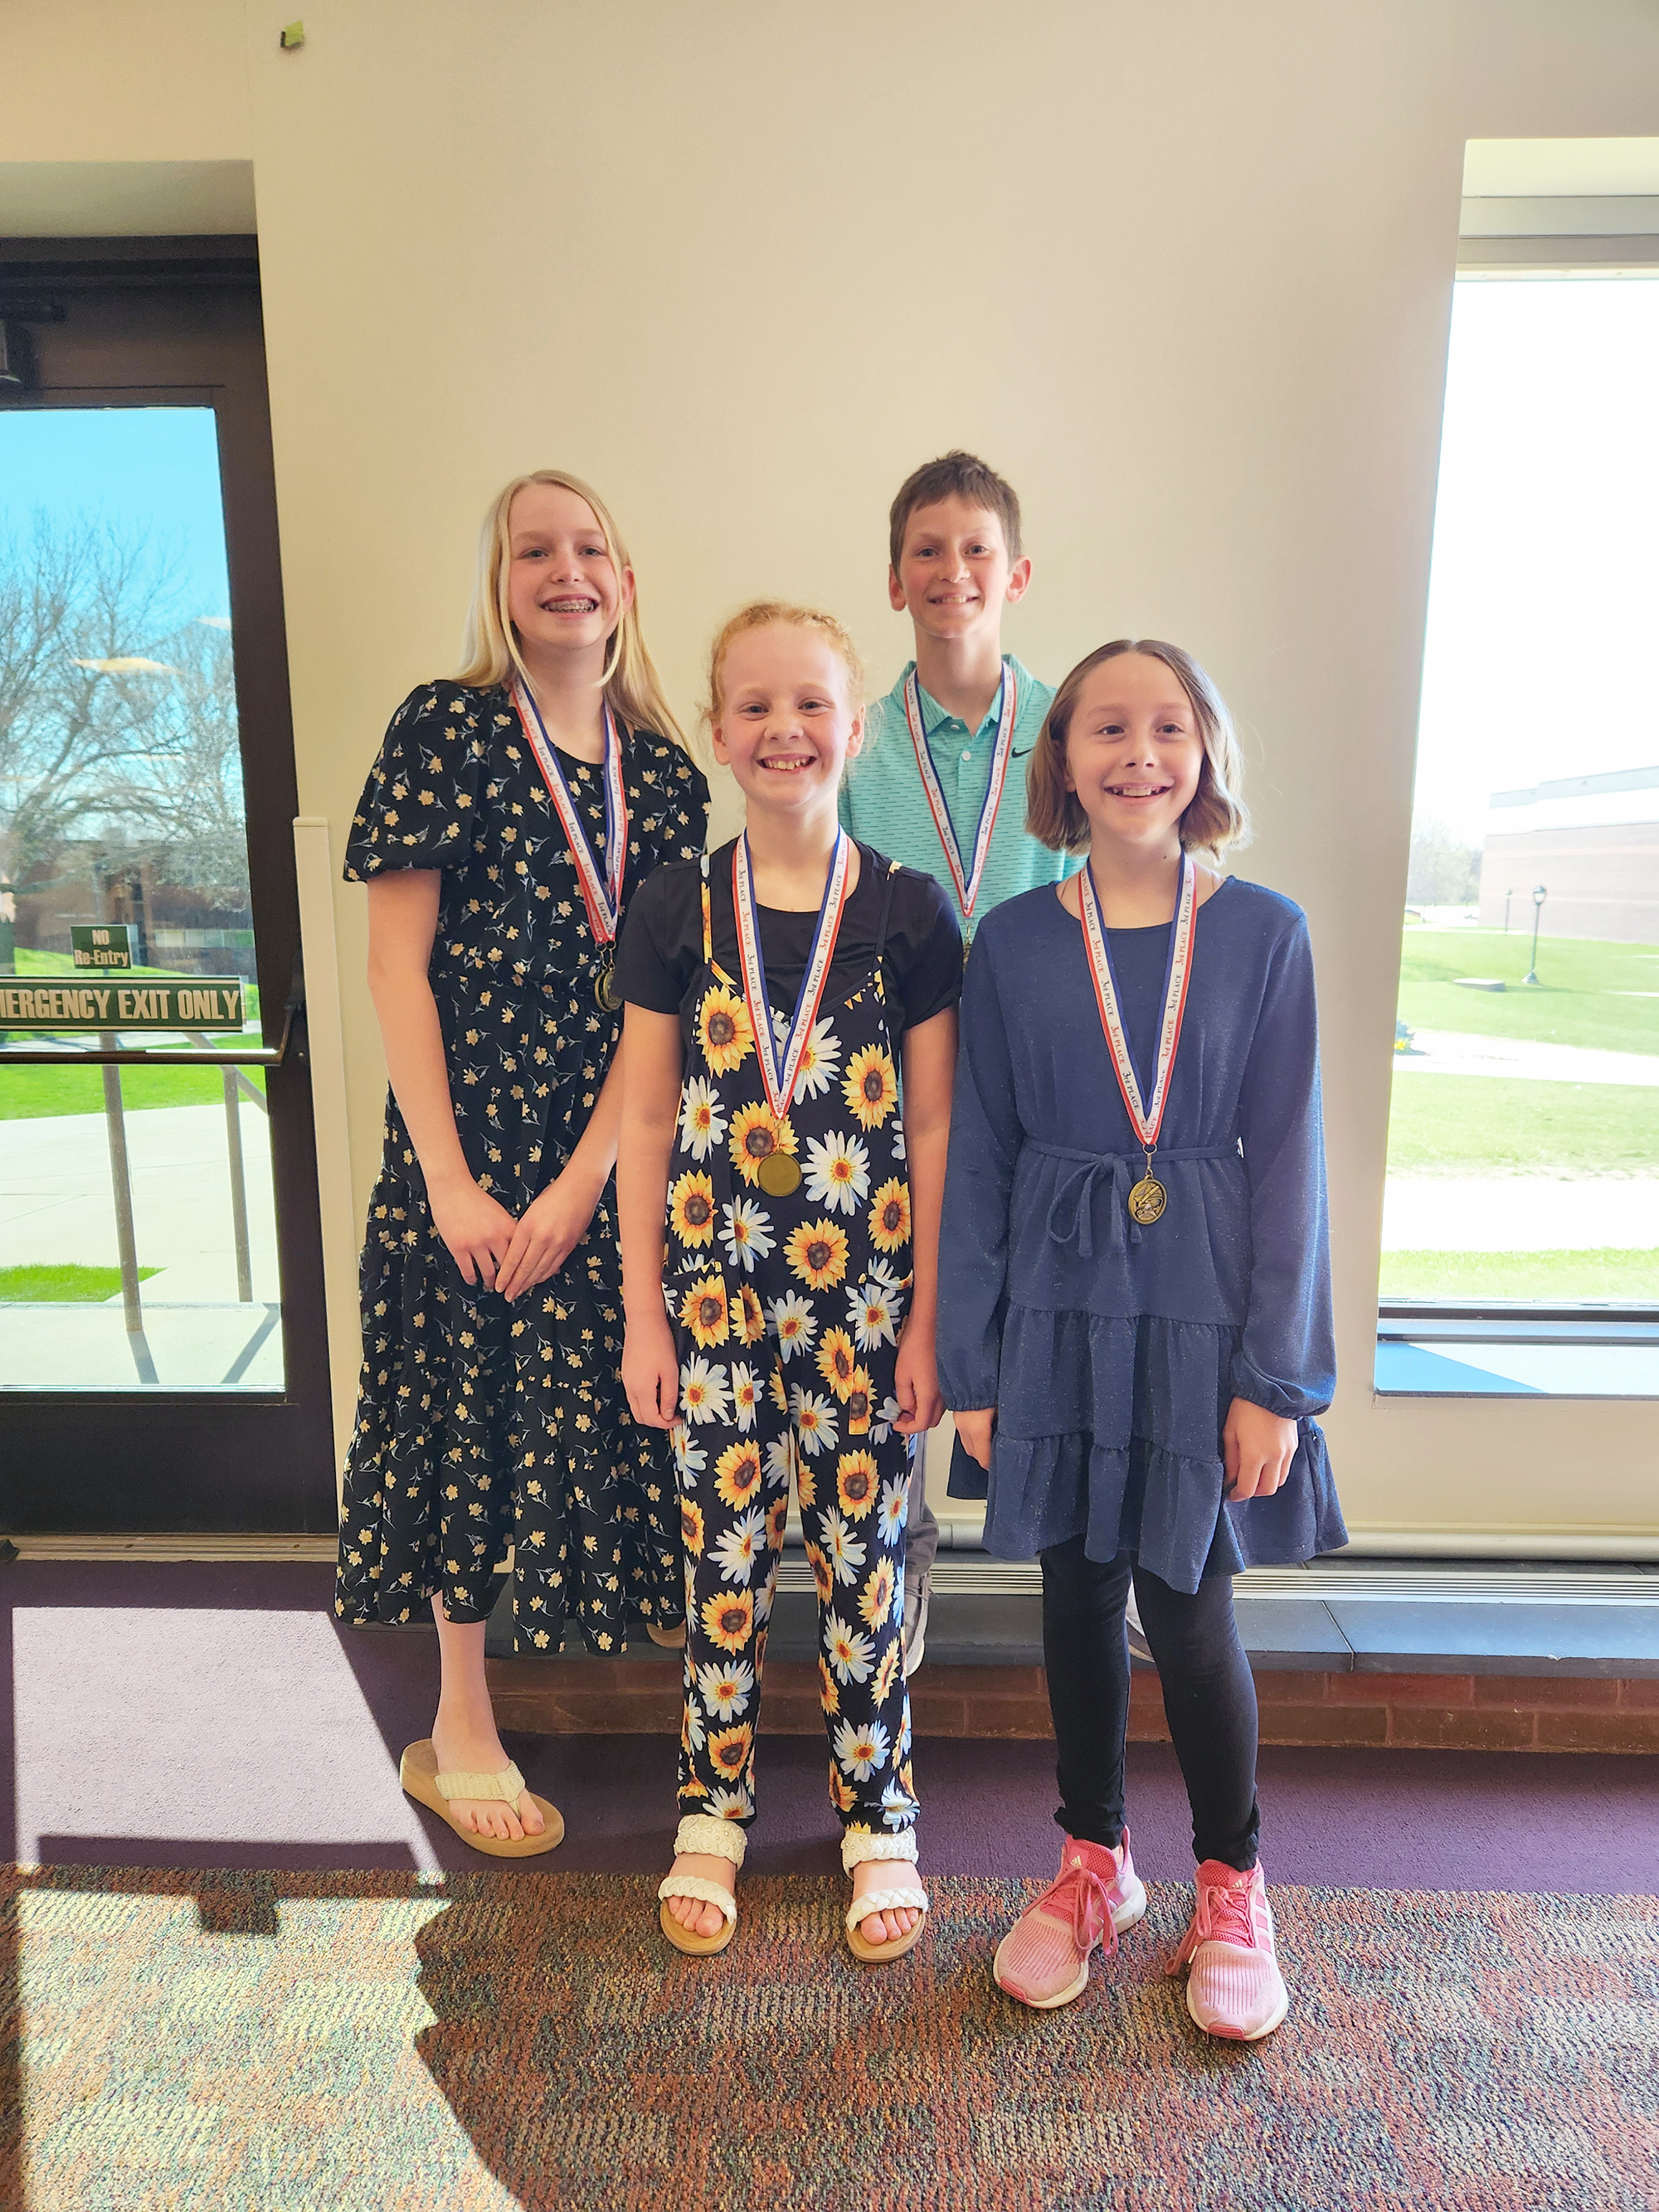 Four students from Hills-Beaver Creek earned medals Sunday at the 20th annual Creative Writing Contest awards ceremony. Pictured are (from left) Penni Moore, Londyn DeBoer, Bryce Metzger and Grace Prohl. Submitted Photo